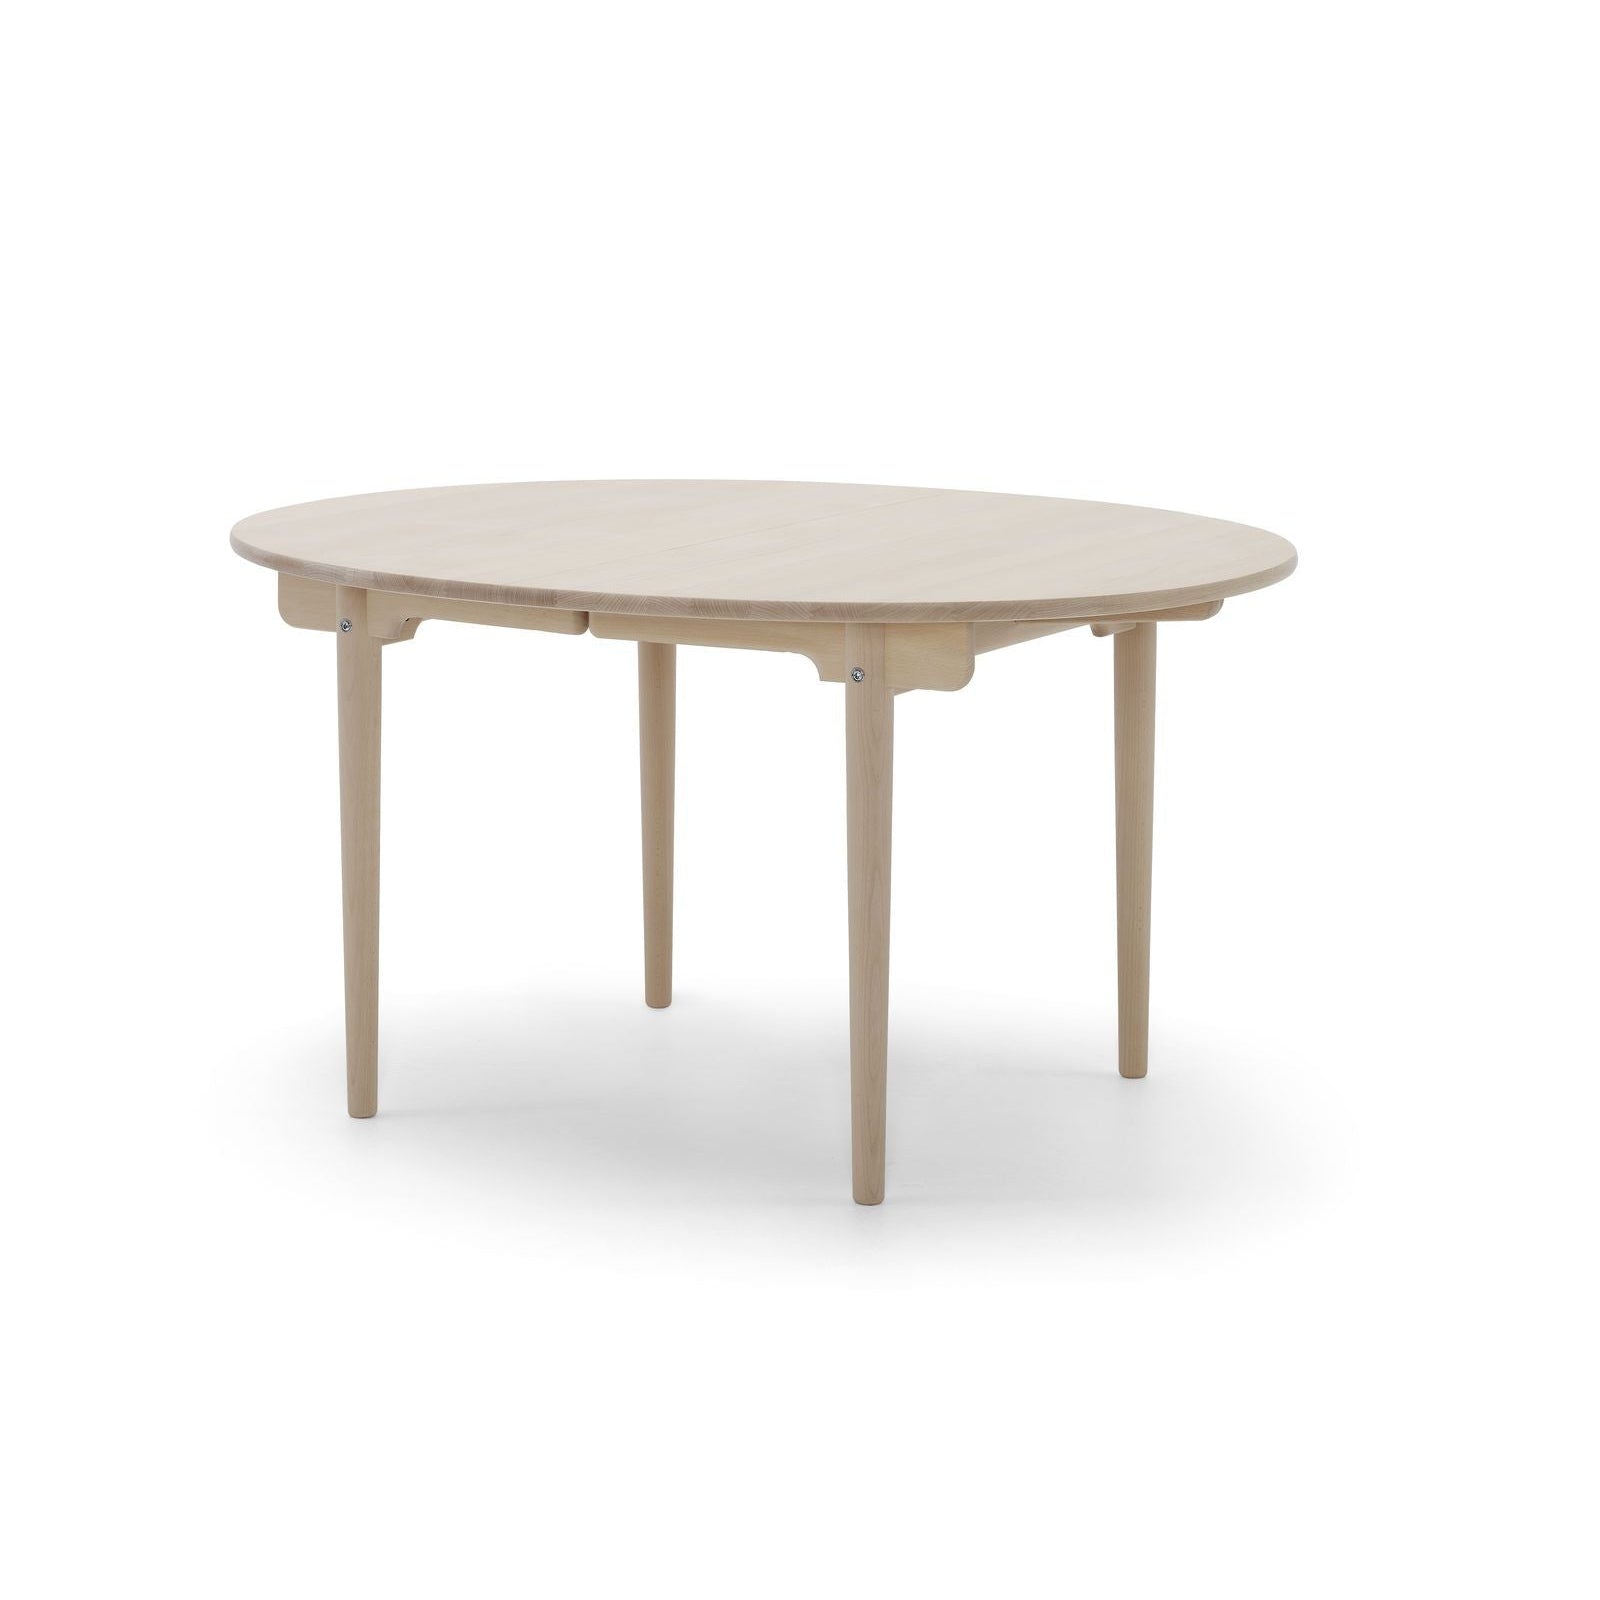 Carl Hansen Ch337 Dining Table Without Additional Top, White Oiled Oak